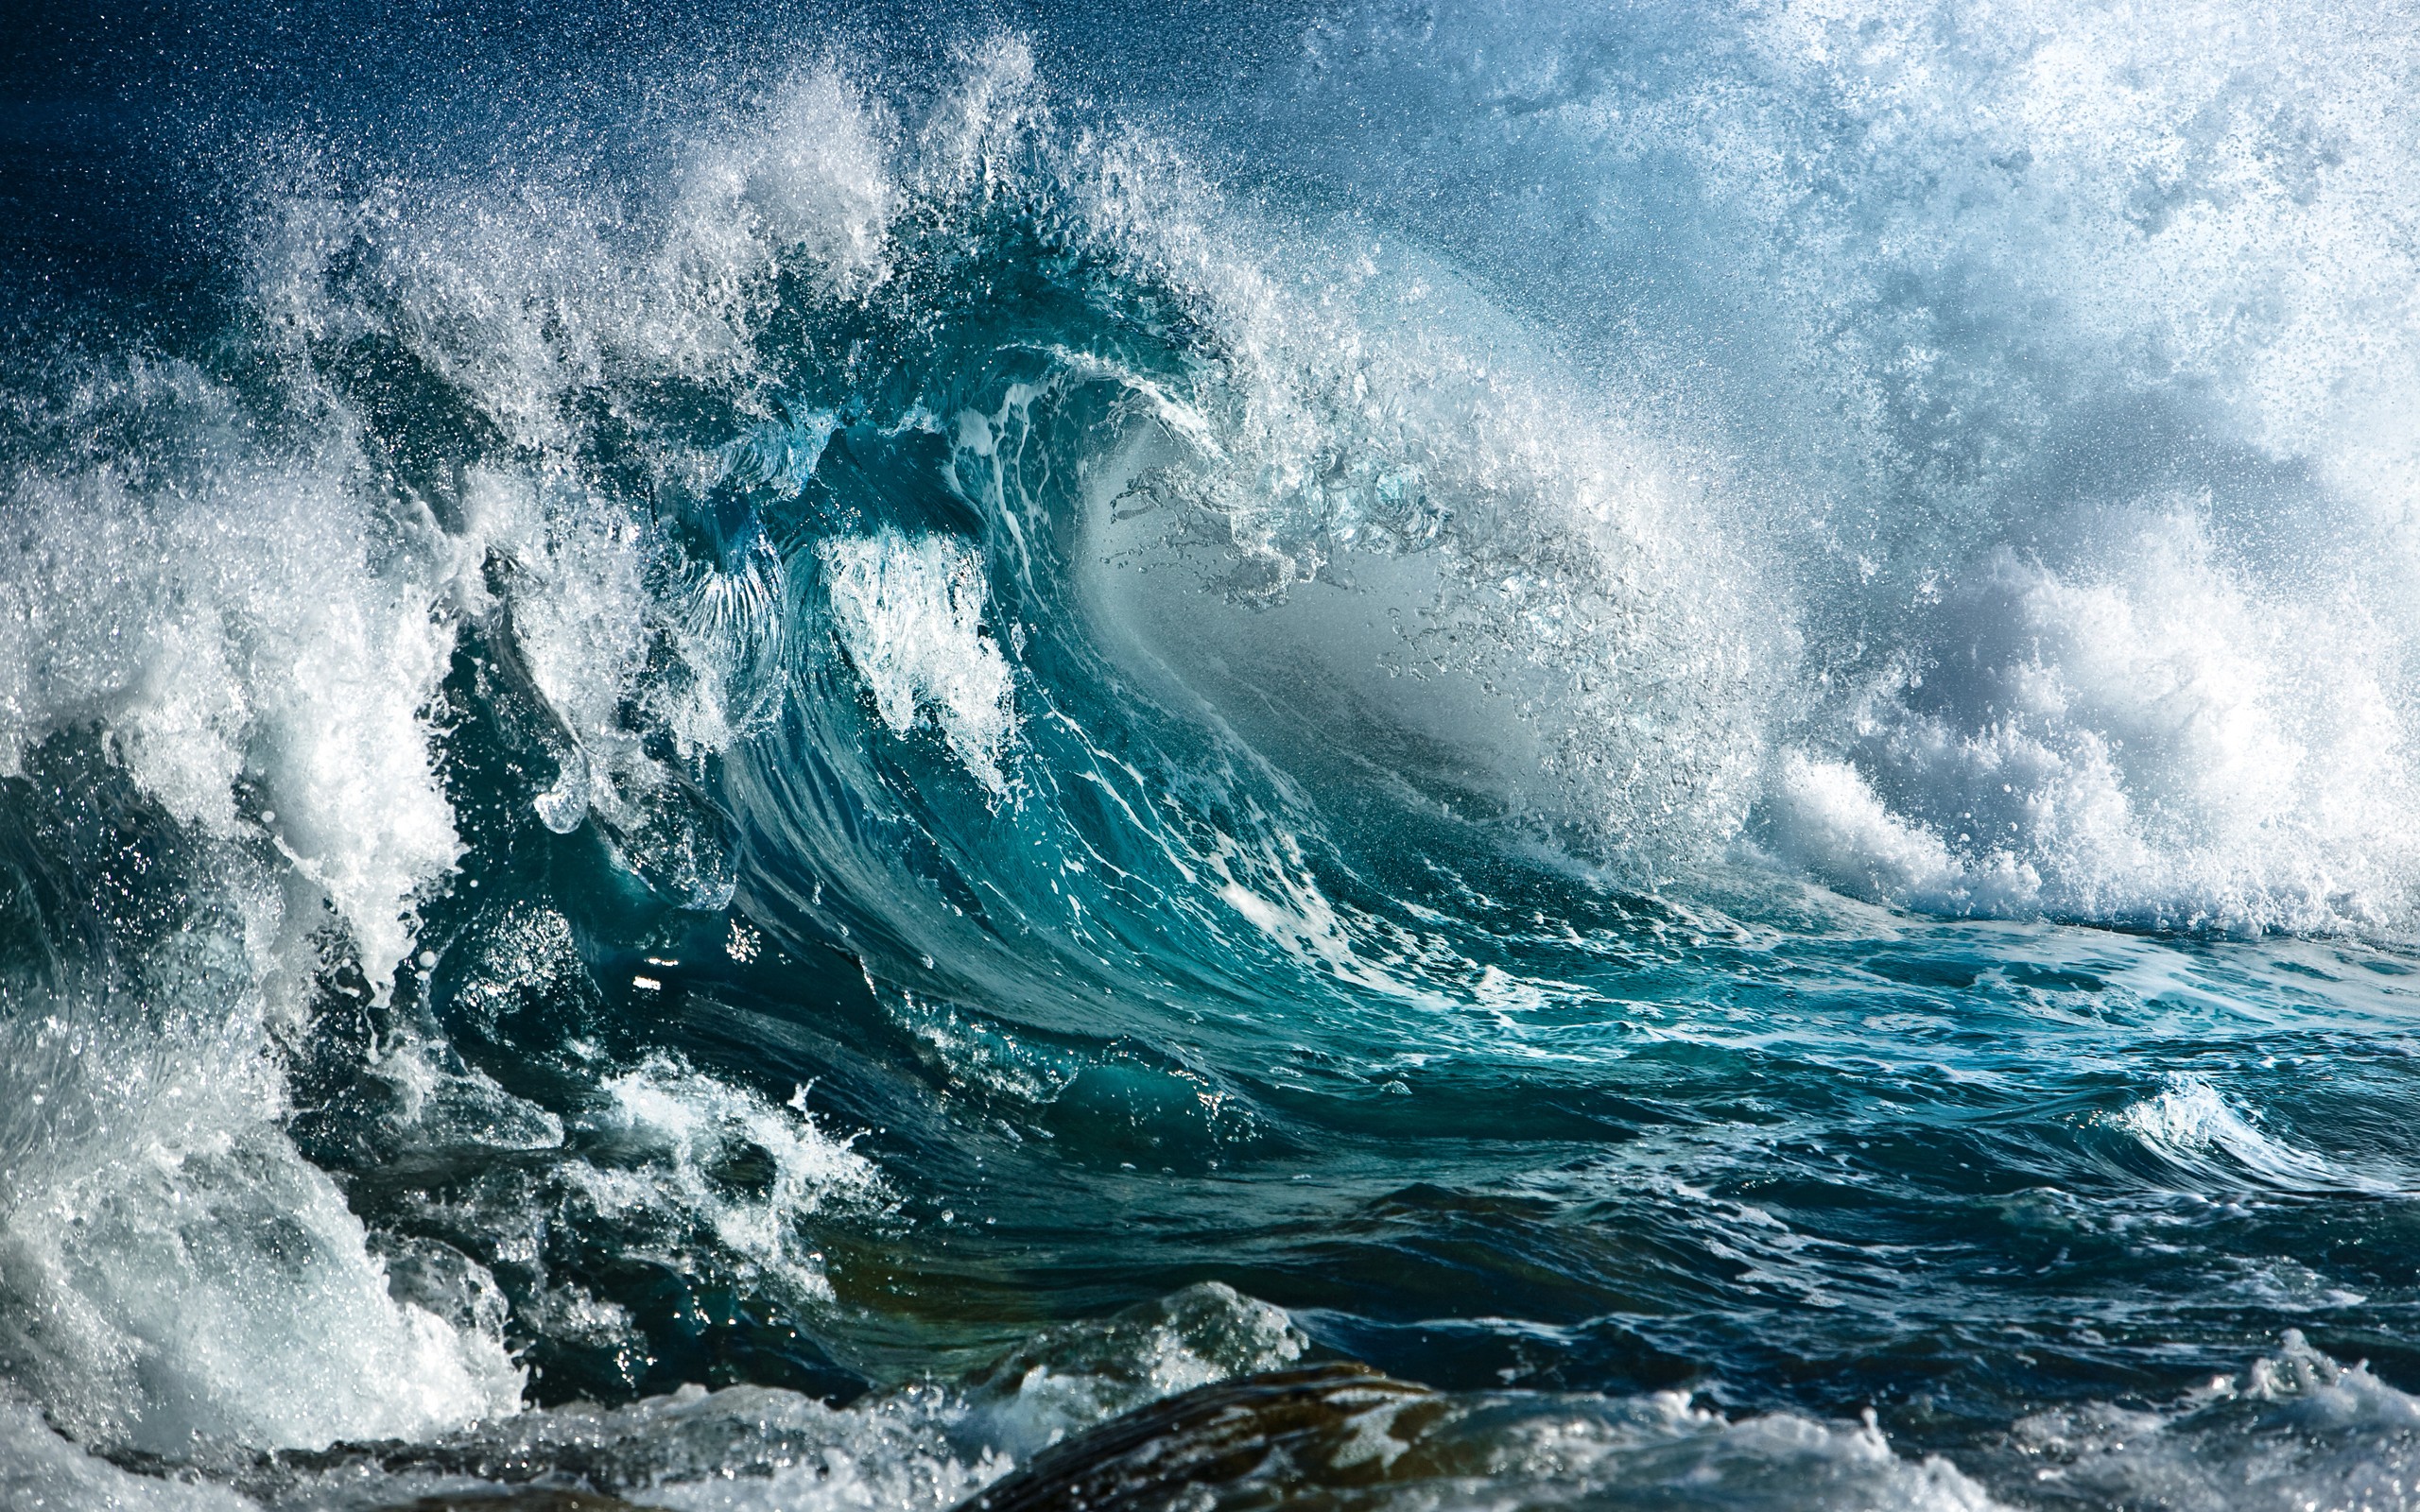 Wave Picture - Wallpaper, High Definition, High Quality, Widescreen